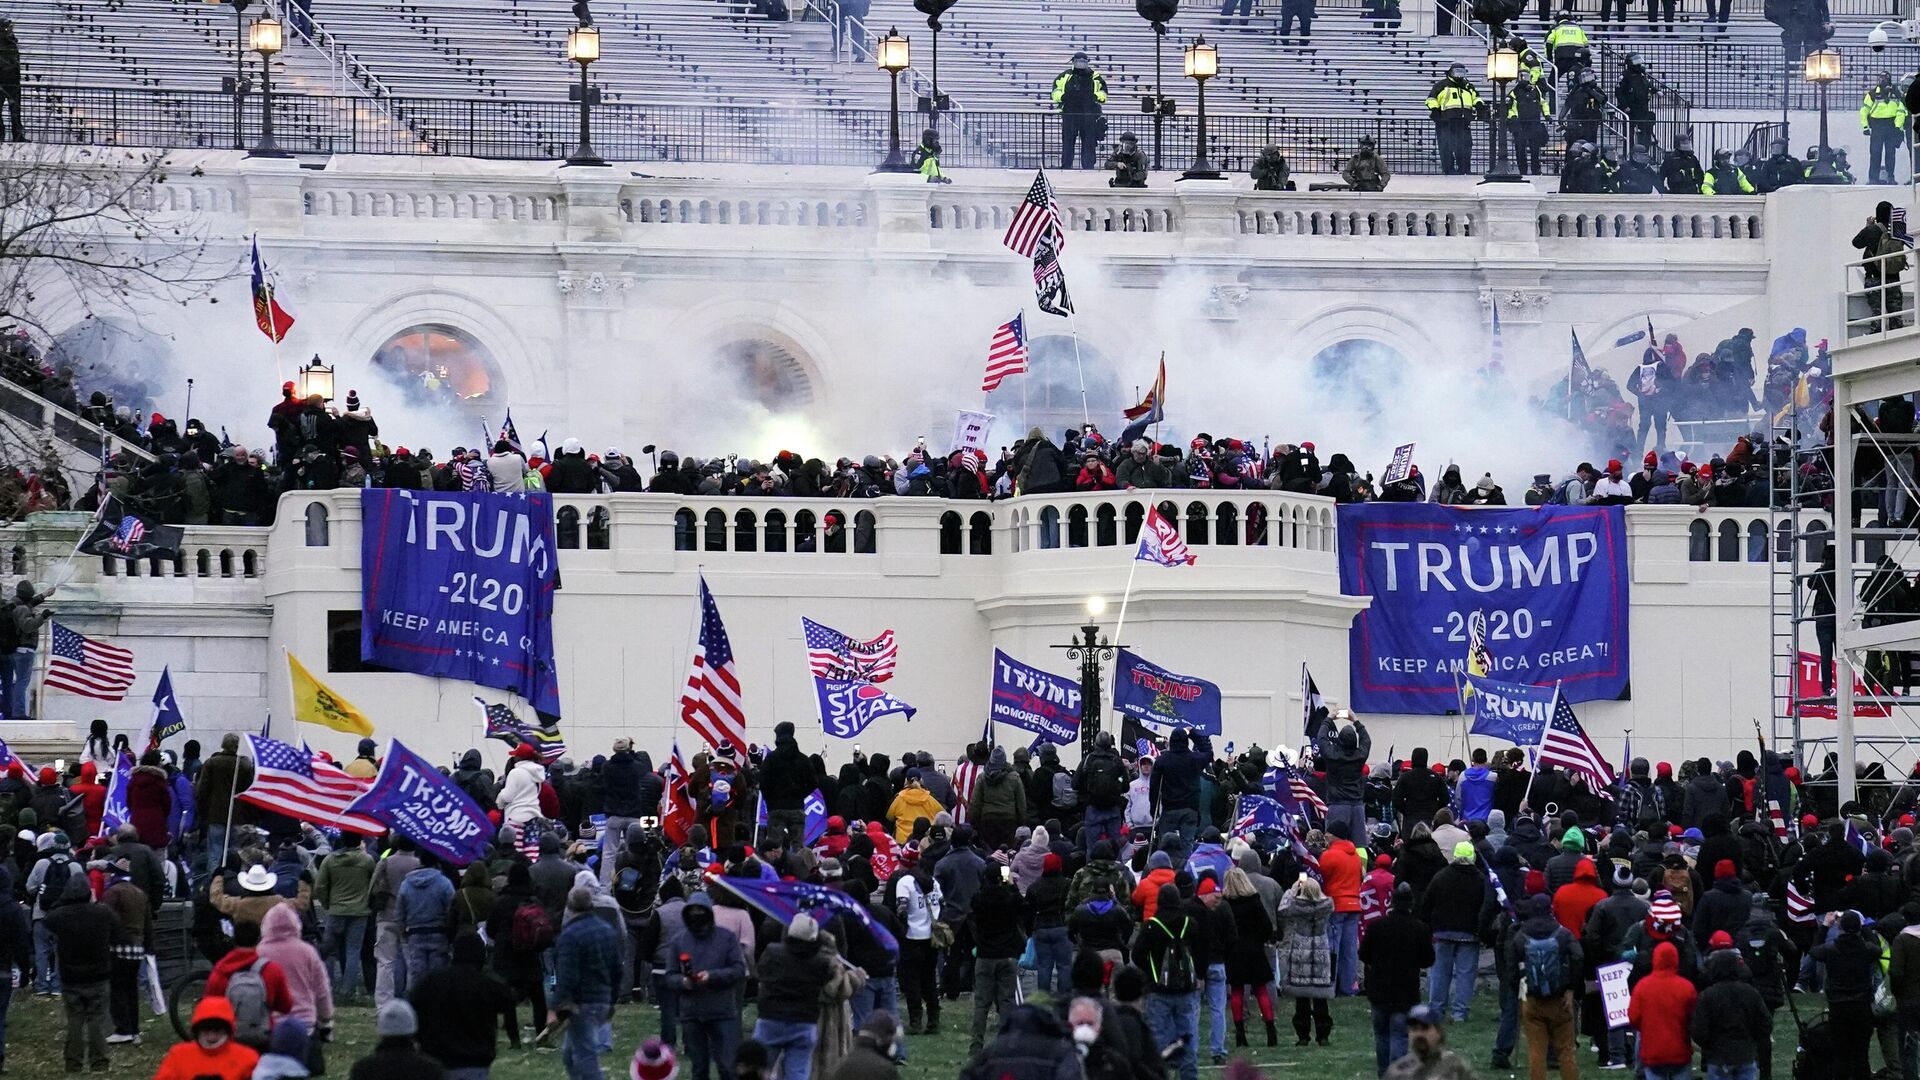 FILE - Violent protesters, loyal to President Donald Trump, storm the Capitol in Washington on Jan. 6, 2021. A man who identified himself as a believer in the QAnon conspiracy theory was sentenced on Wednesday, Jan. 26, 2022, to three years and eight months in prison for assaulting police officers at the Capitol during last year's riot. Nicholas Languerand called himself a patriot, but the judge who sentenced him said the rioters who invaded the Capitol on Jan. 6, 2021, don't deserve that description. (AP Photo/John Minchillo, File) - Sputnik International, 1920, 29.06.2022